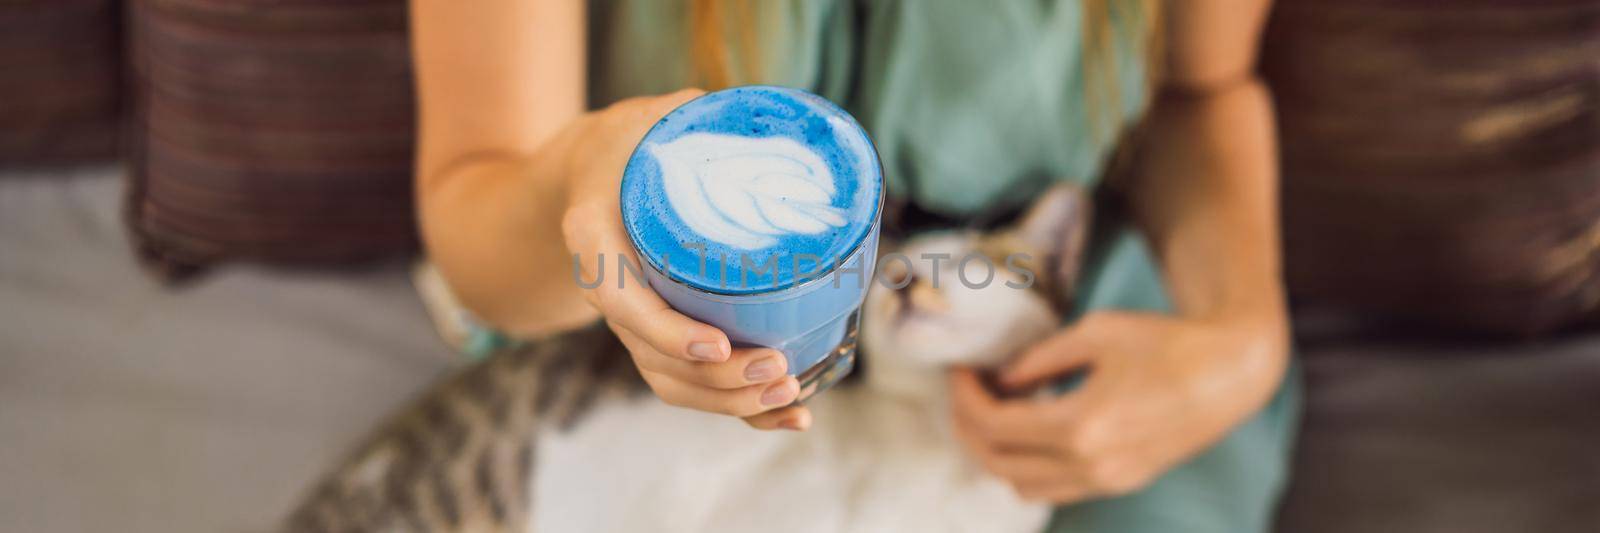 Young woman having a mediterranean breakfast seated at sofa and with her cat and drinks Trendy drink: Blue latte. Hot butterfly pea latte or blue spirulina latte BANNER, LONG FORMAT by galitskaya